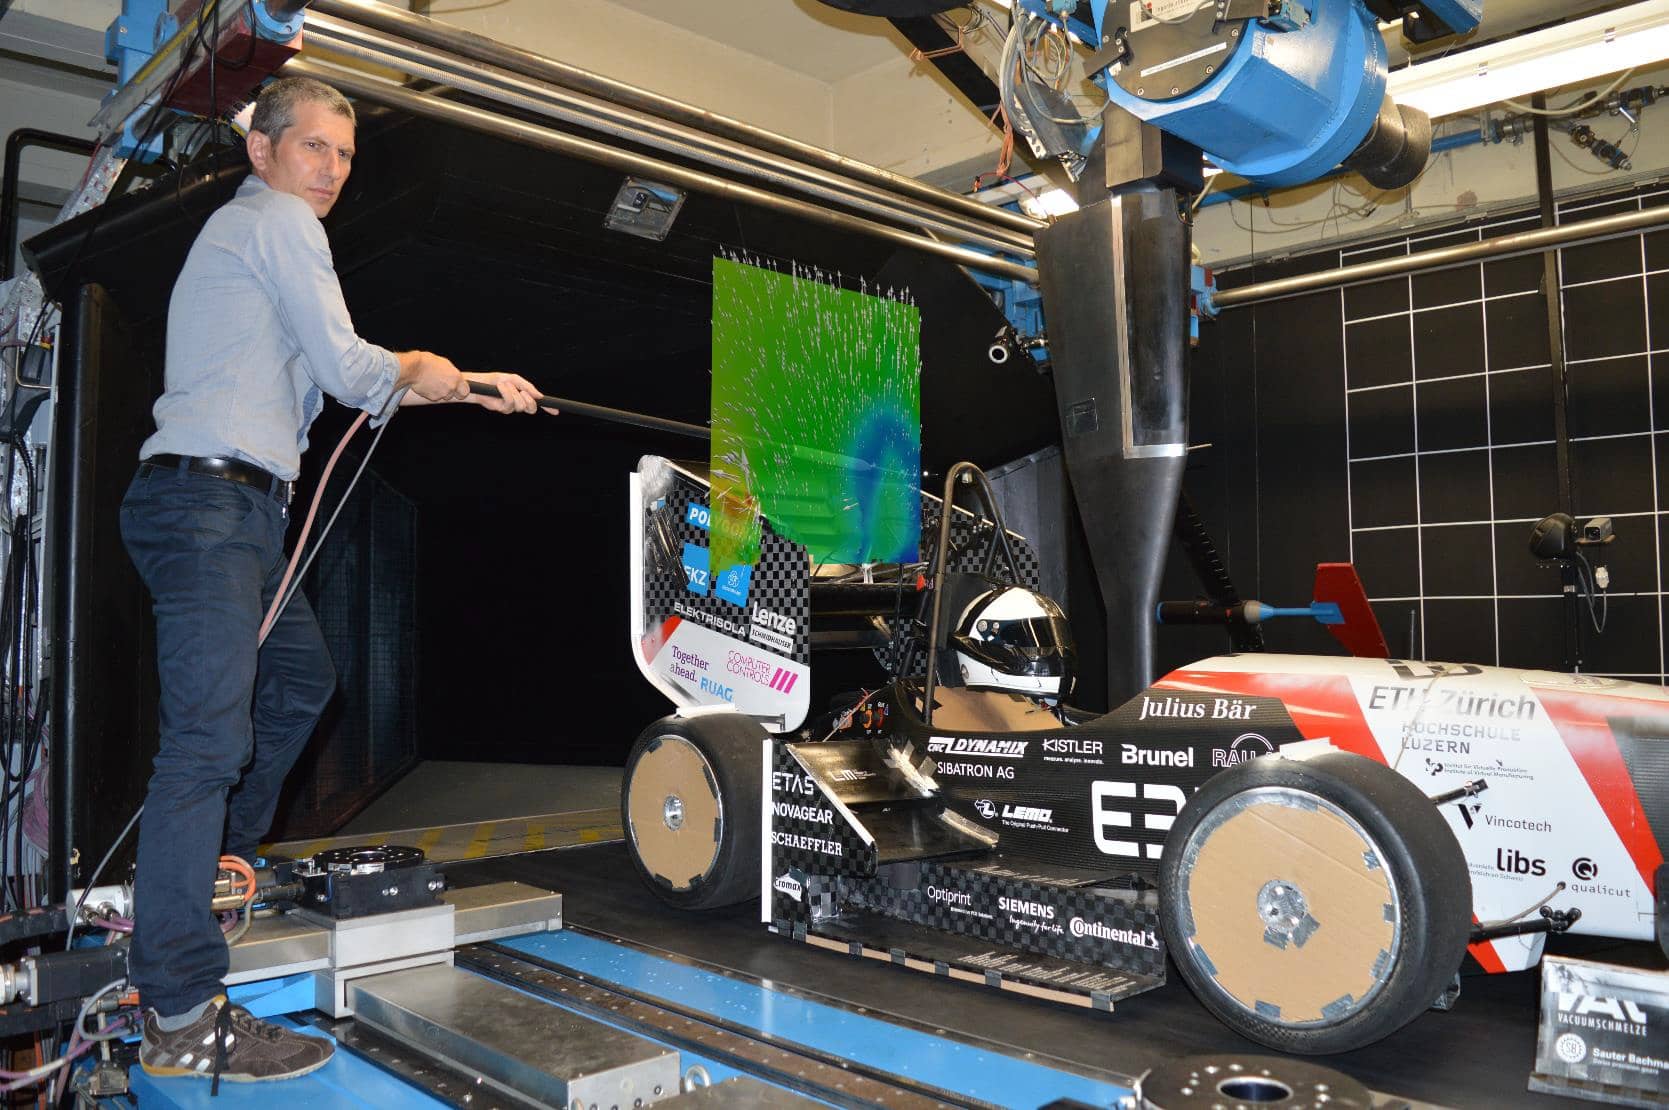 3D Flow Measurement in the Wind Tunnel - A Formula Student Case Study